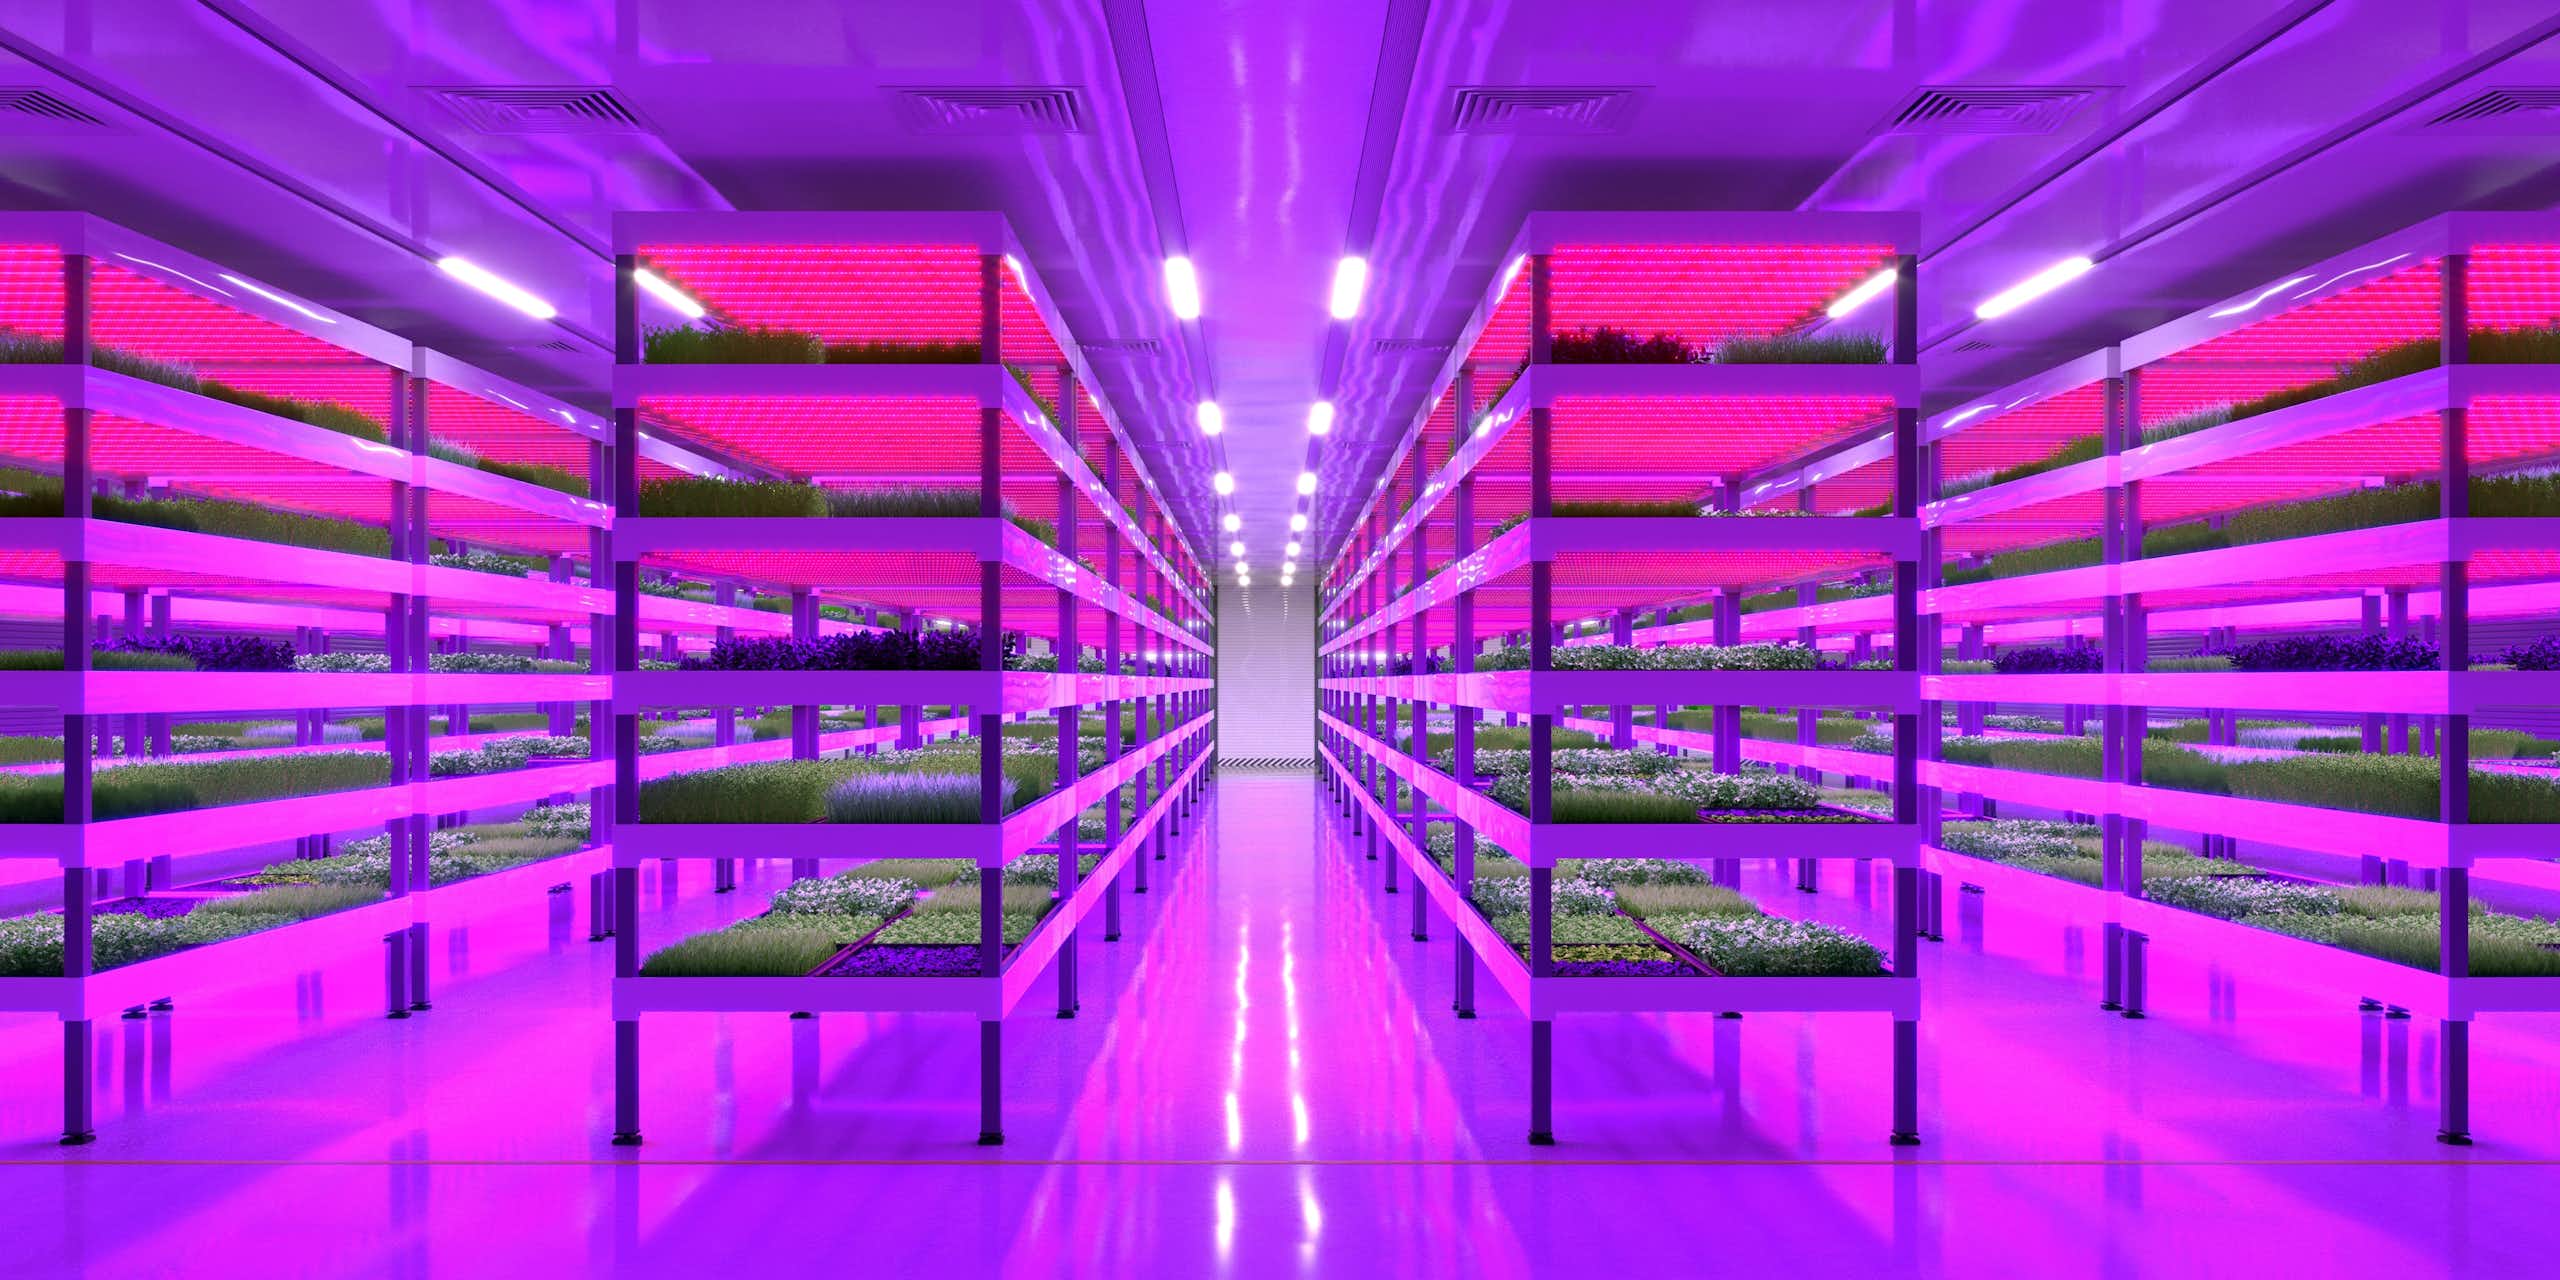 purple lit warehouse with long shelving units and green veg growing in rows indoors